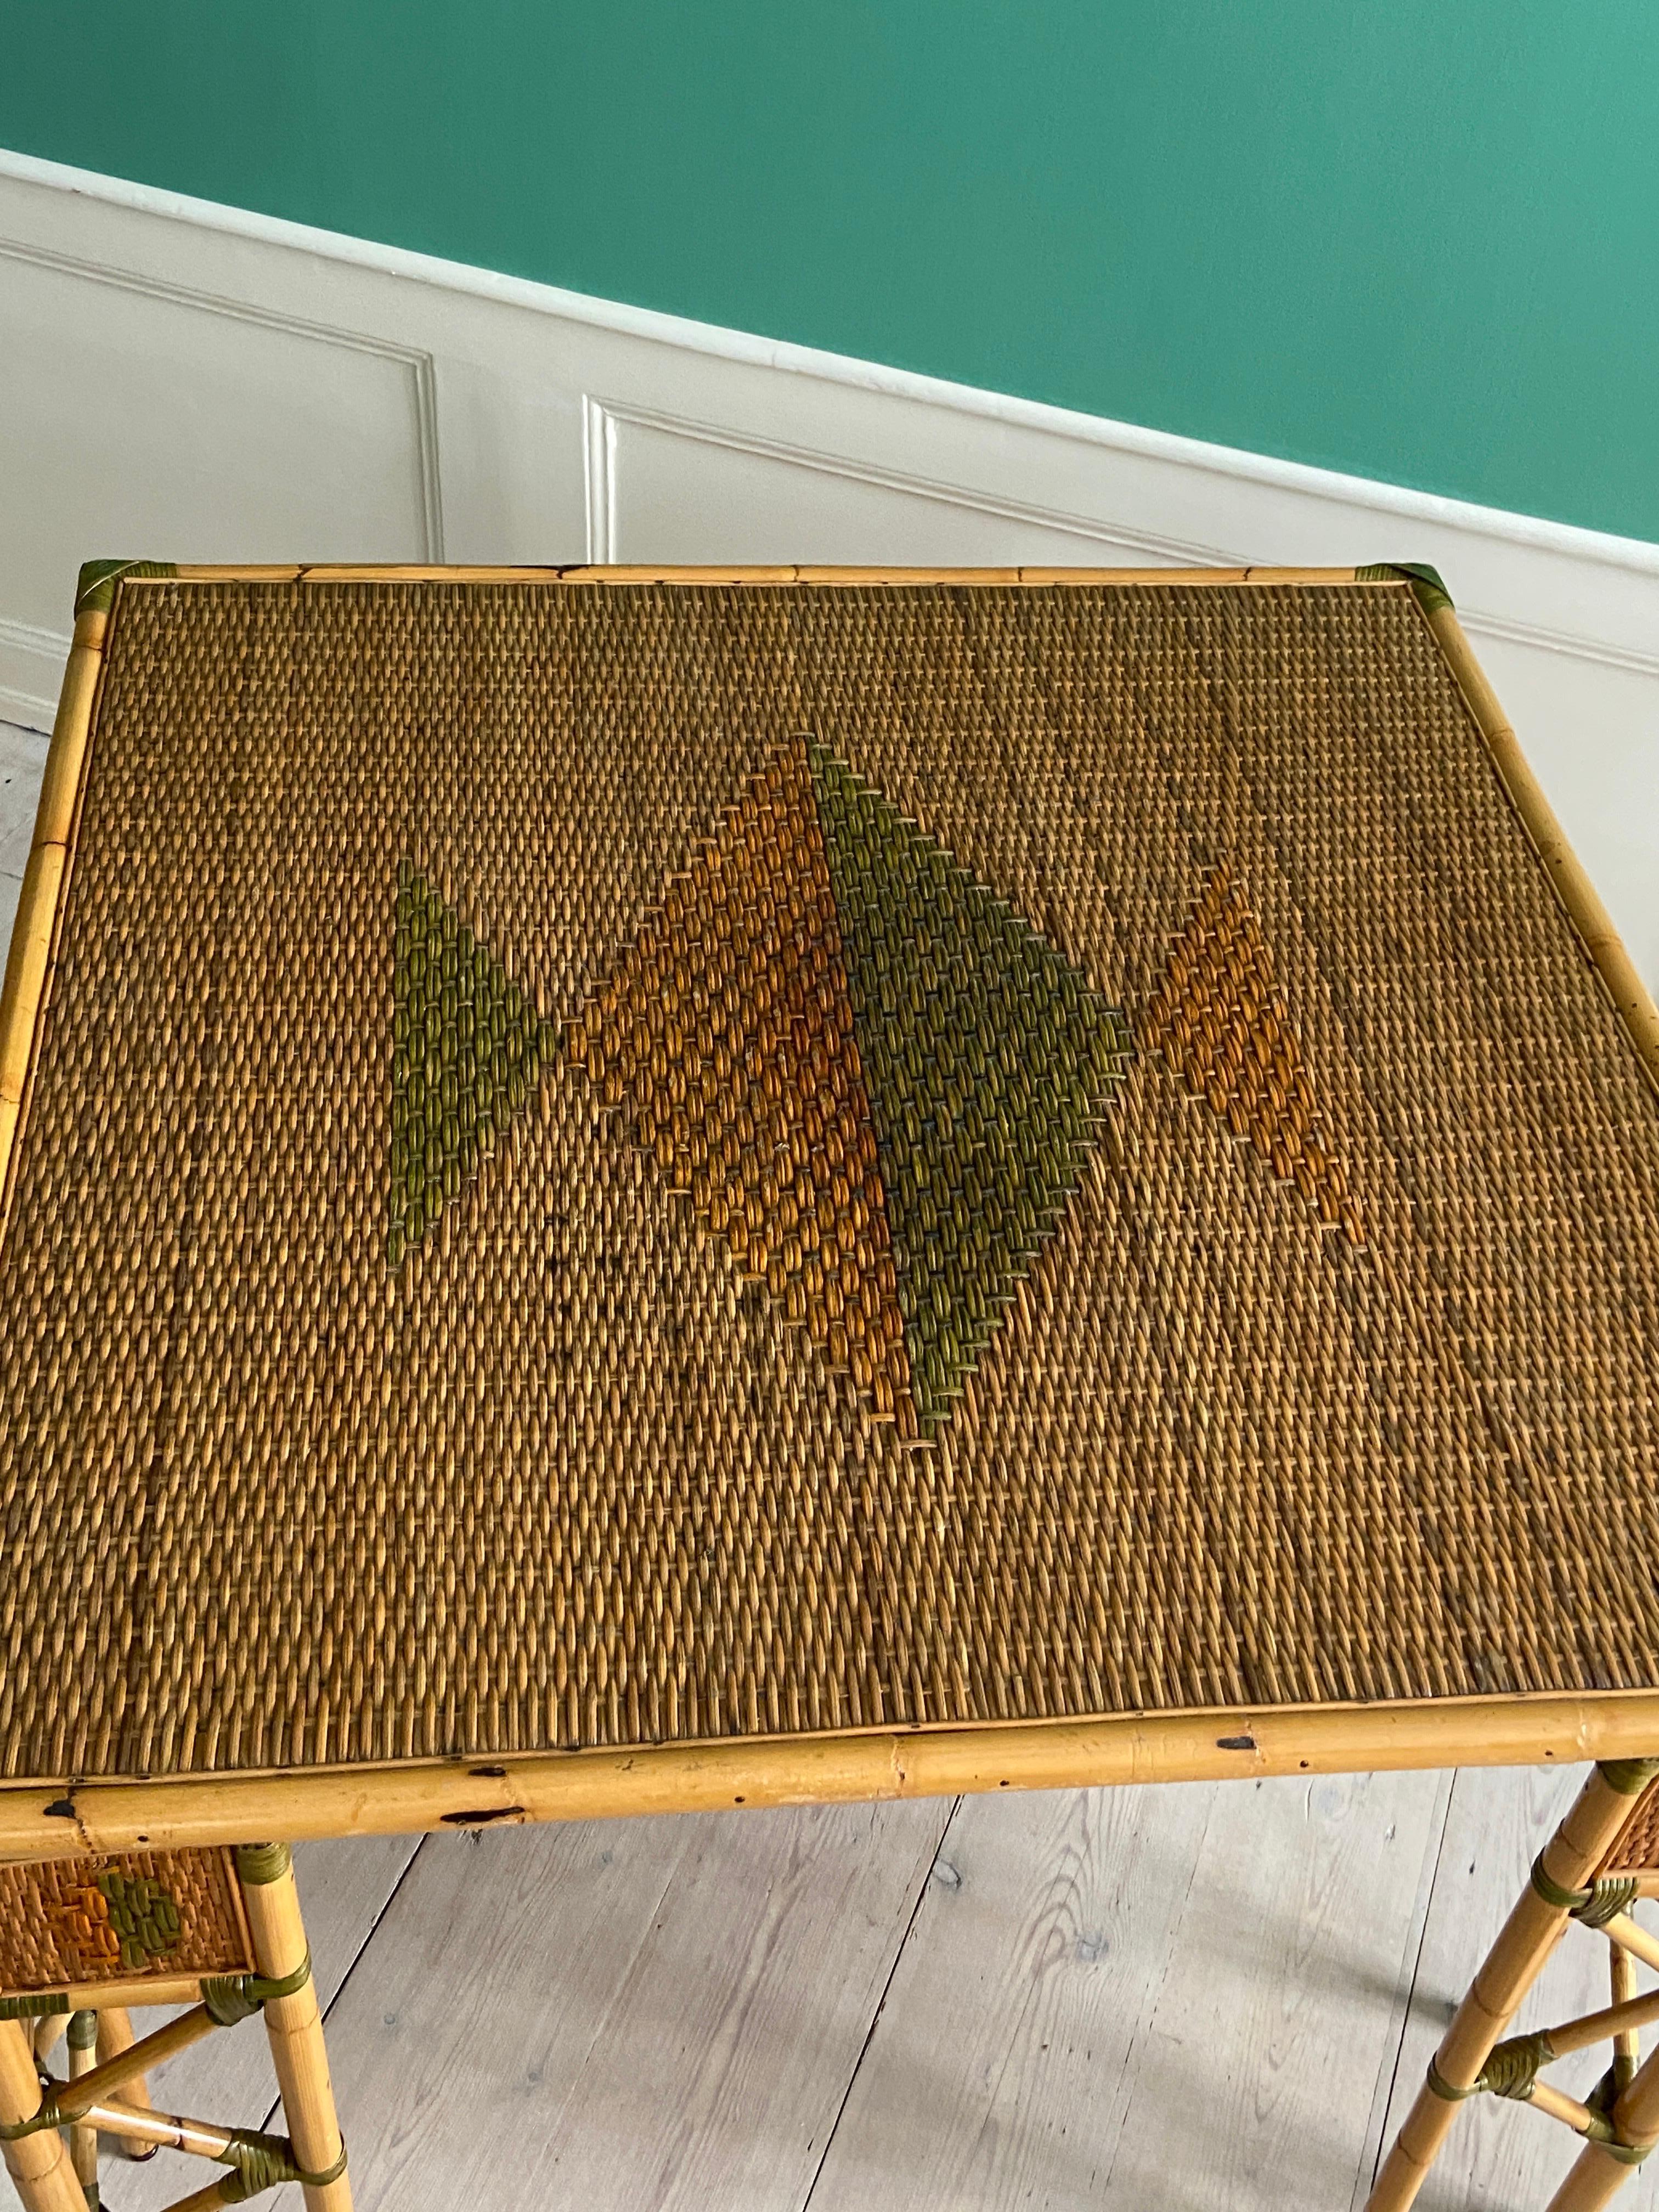 Vintage Woven Bamboo Table with Brass Details, France, Early 20th Century For Sale 1